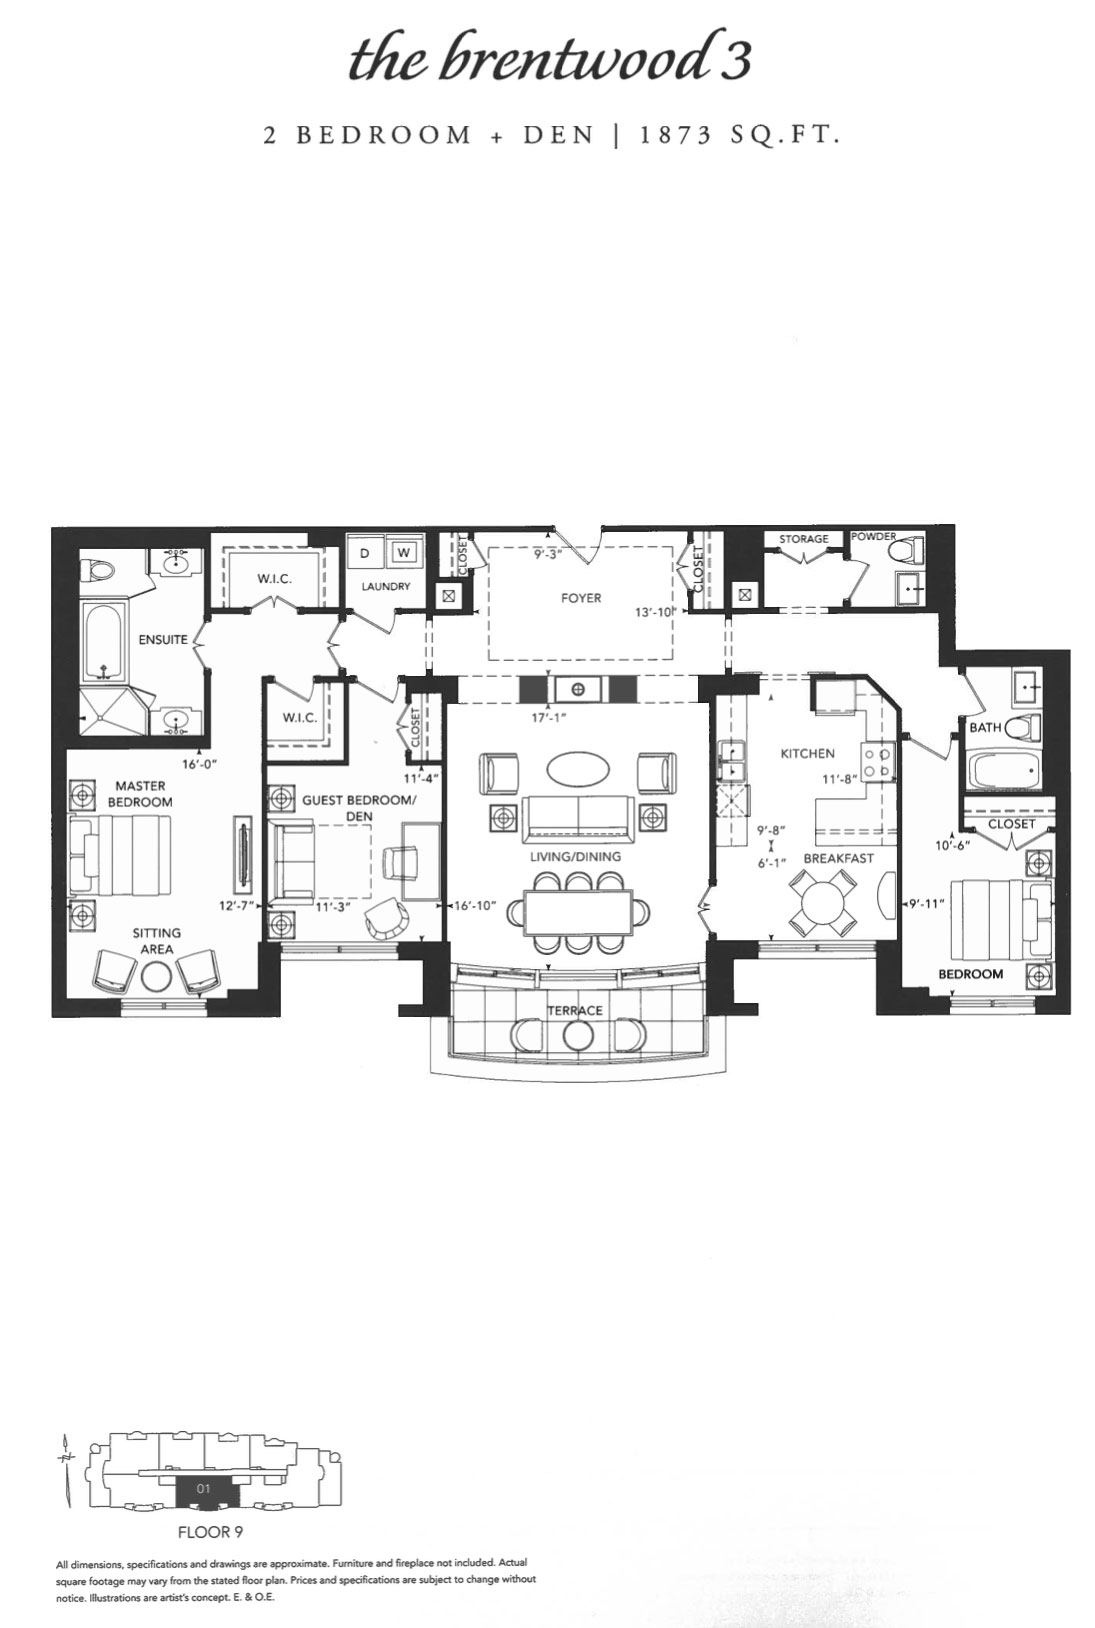 Riverhouse Condos - Suite The Brentwood 3